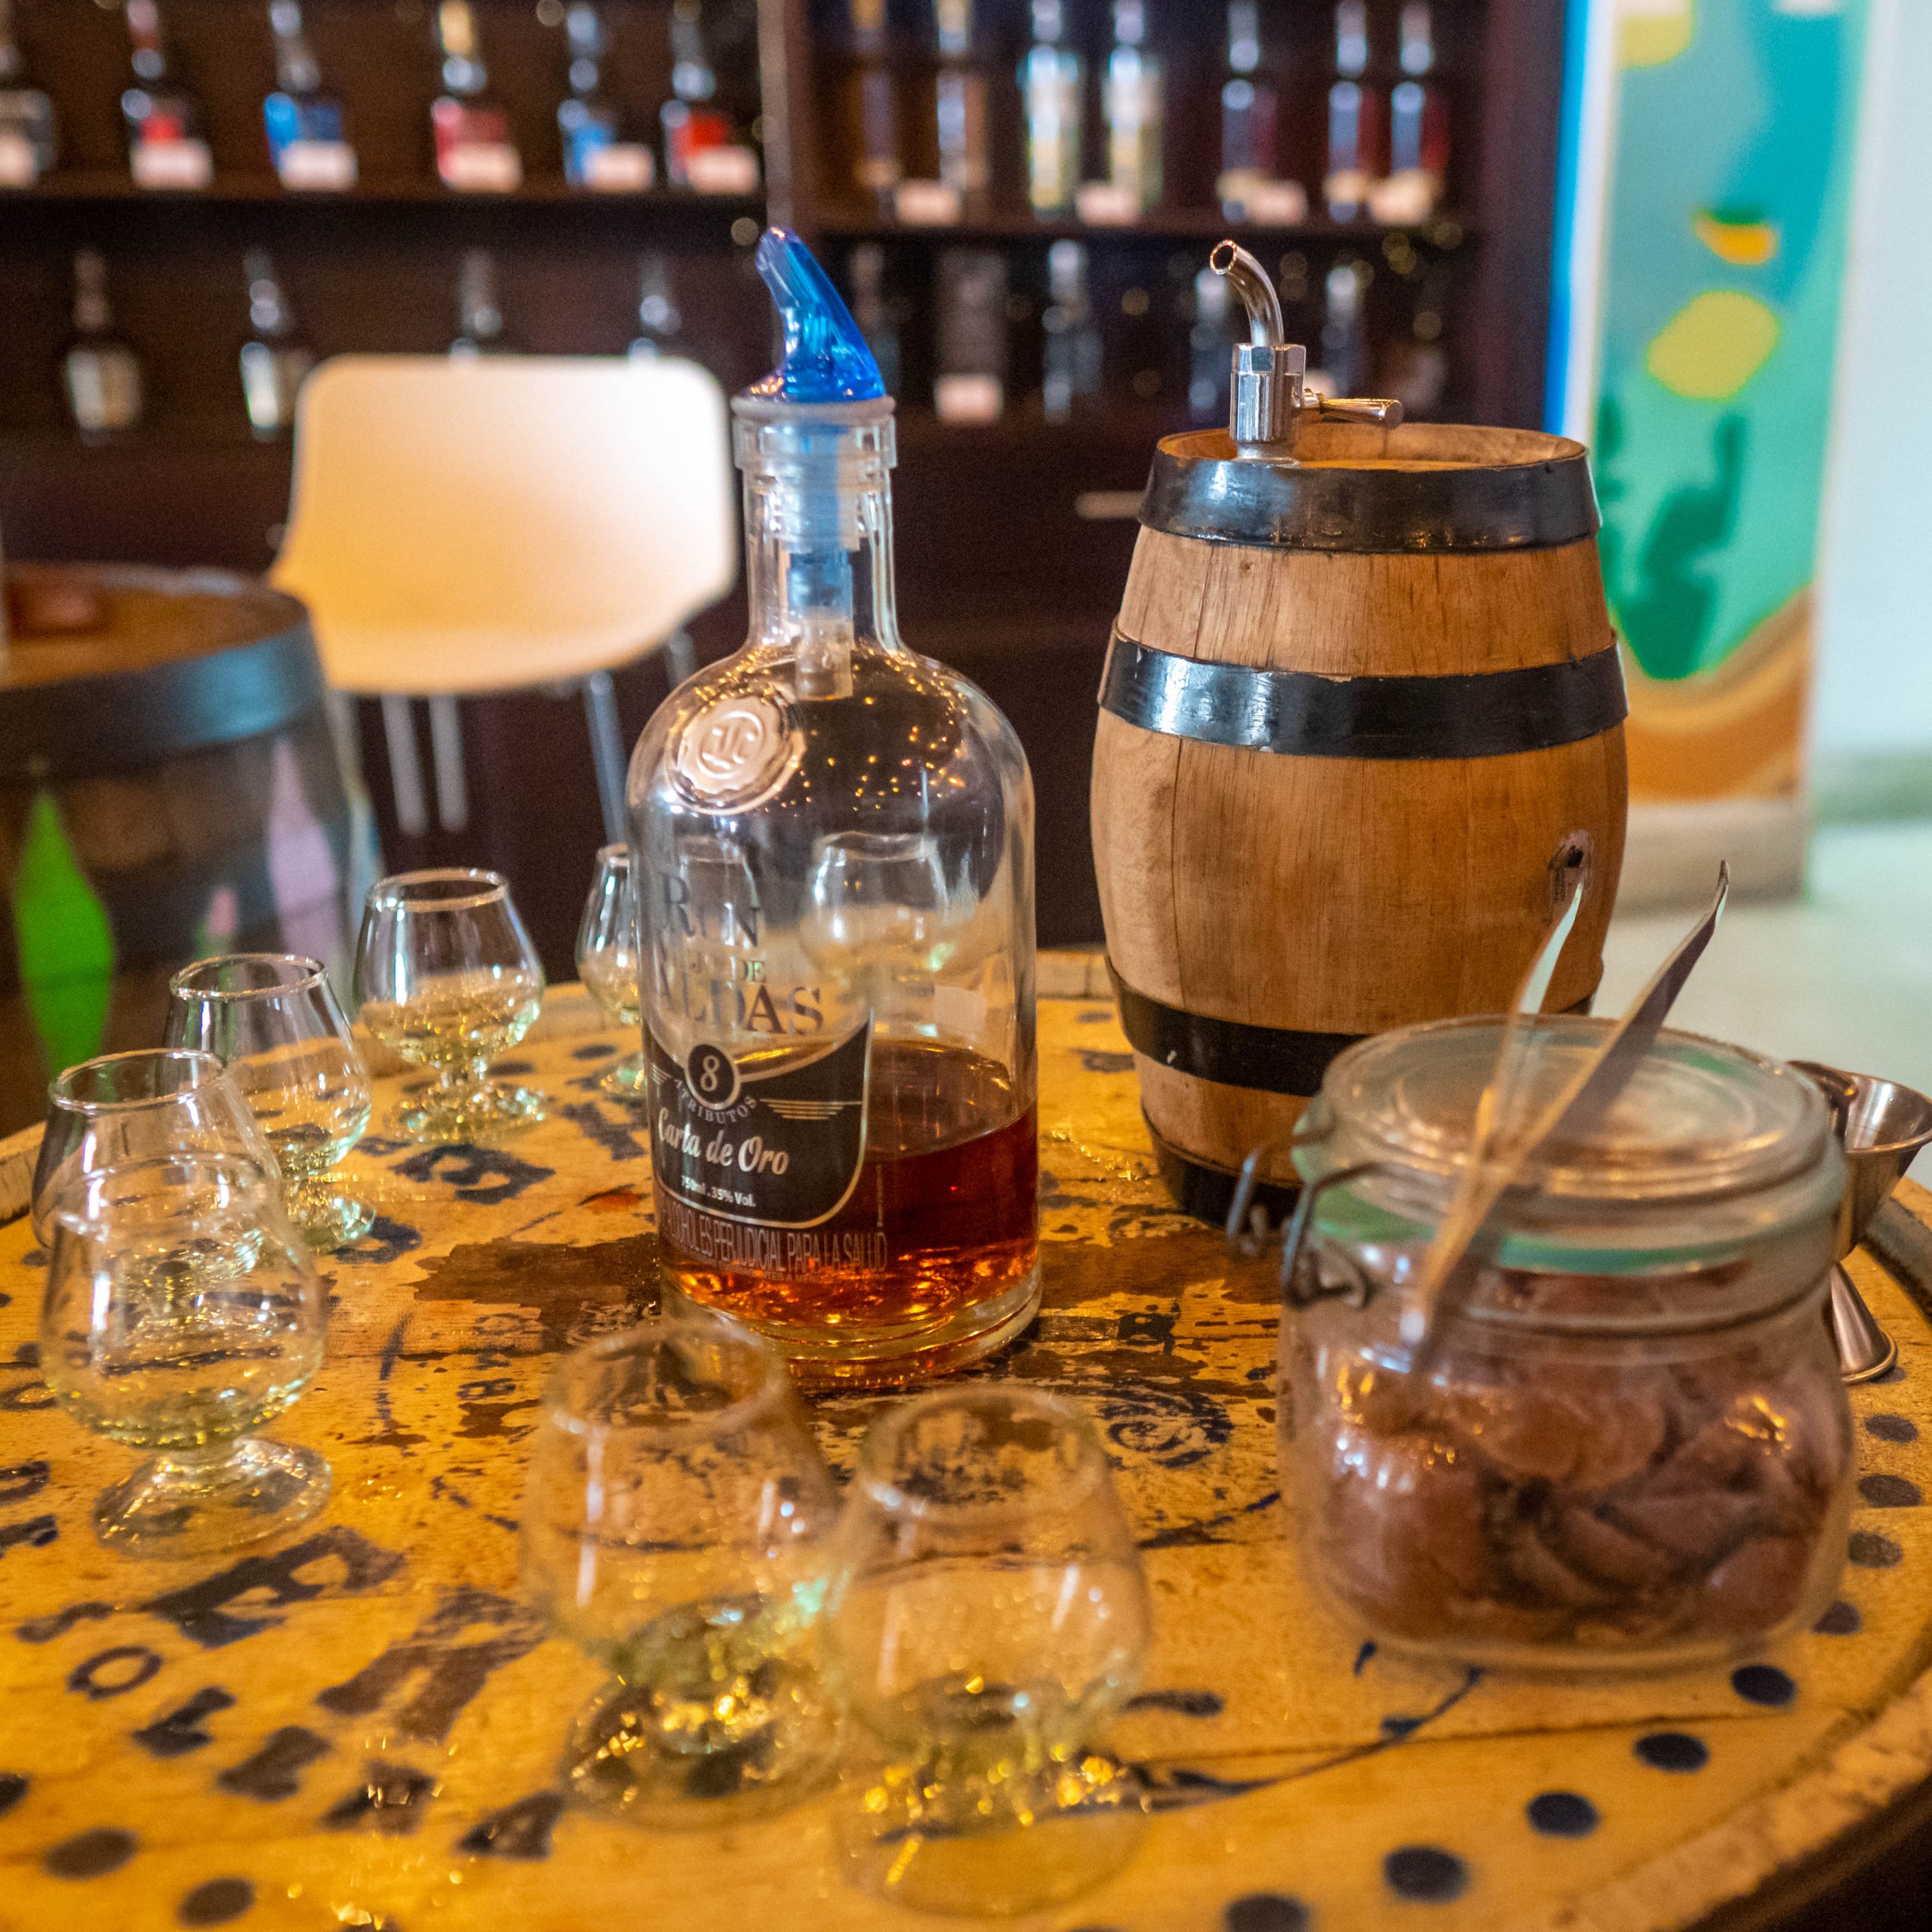 Rum, Chocolate, and Colombian Snack Tasting Experience